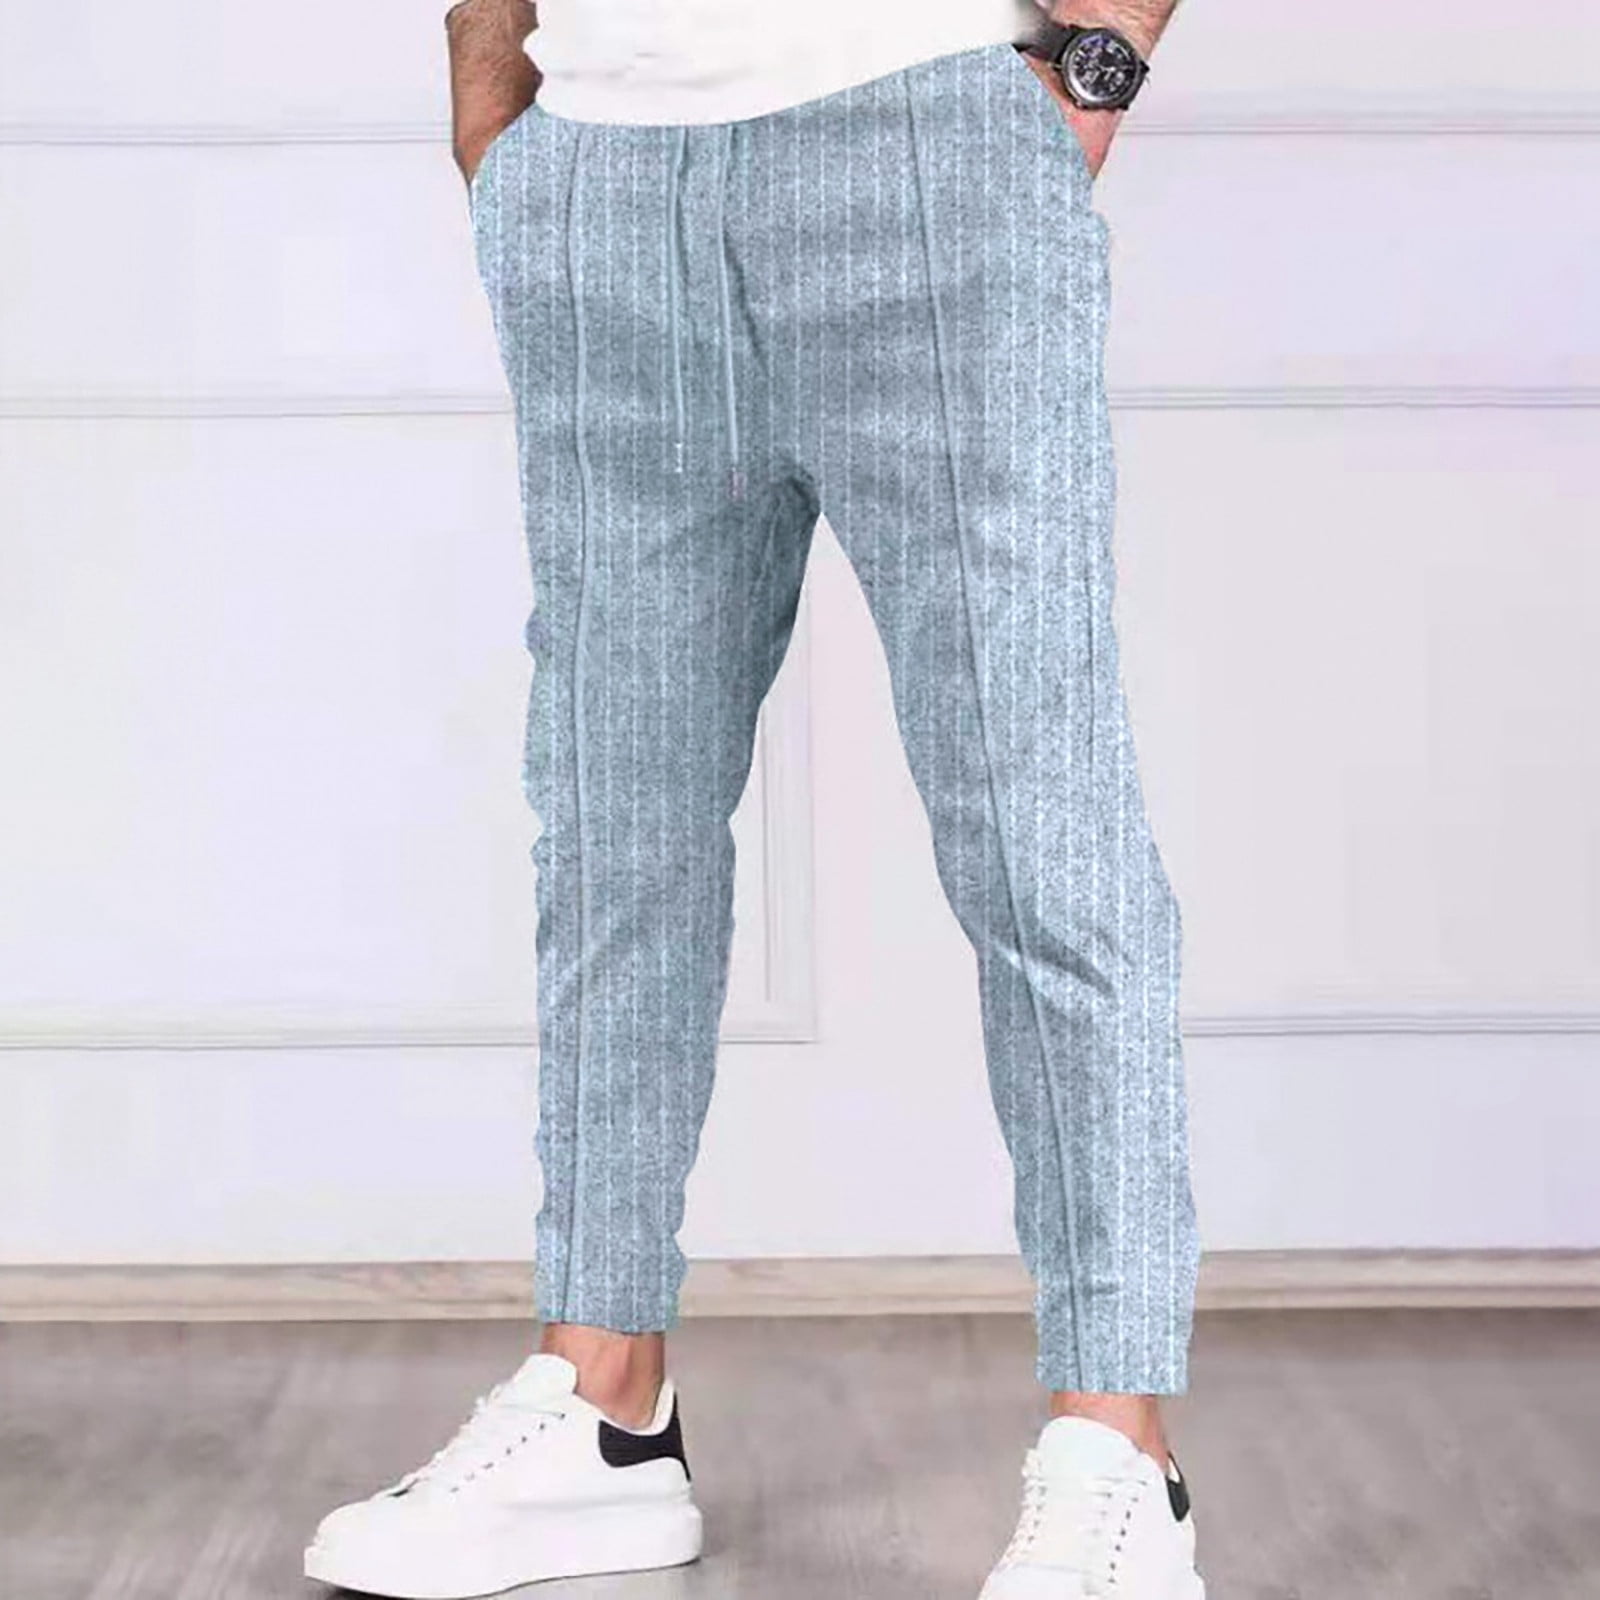 Mens Loose Fit Outdoor Running Trousers For Men With Pocket Overalls Y0927  From Mengqiqi04, $18.16 | DHgate.Com